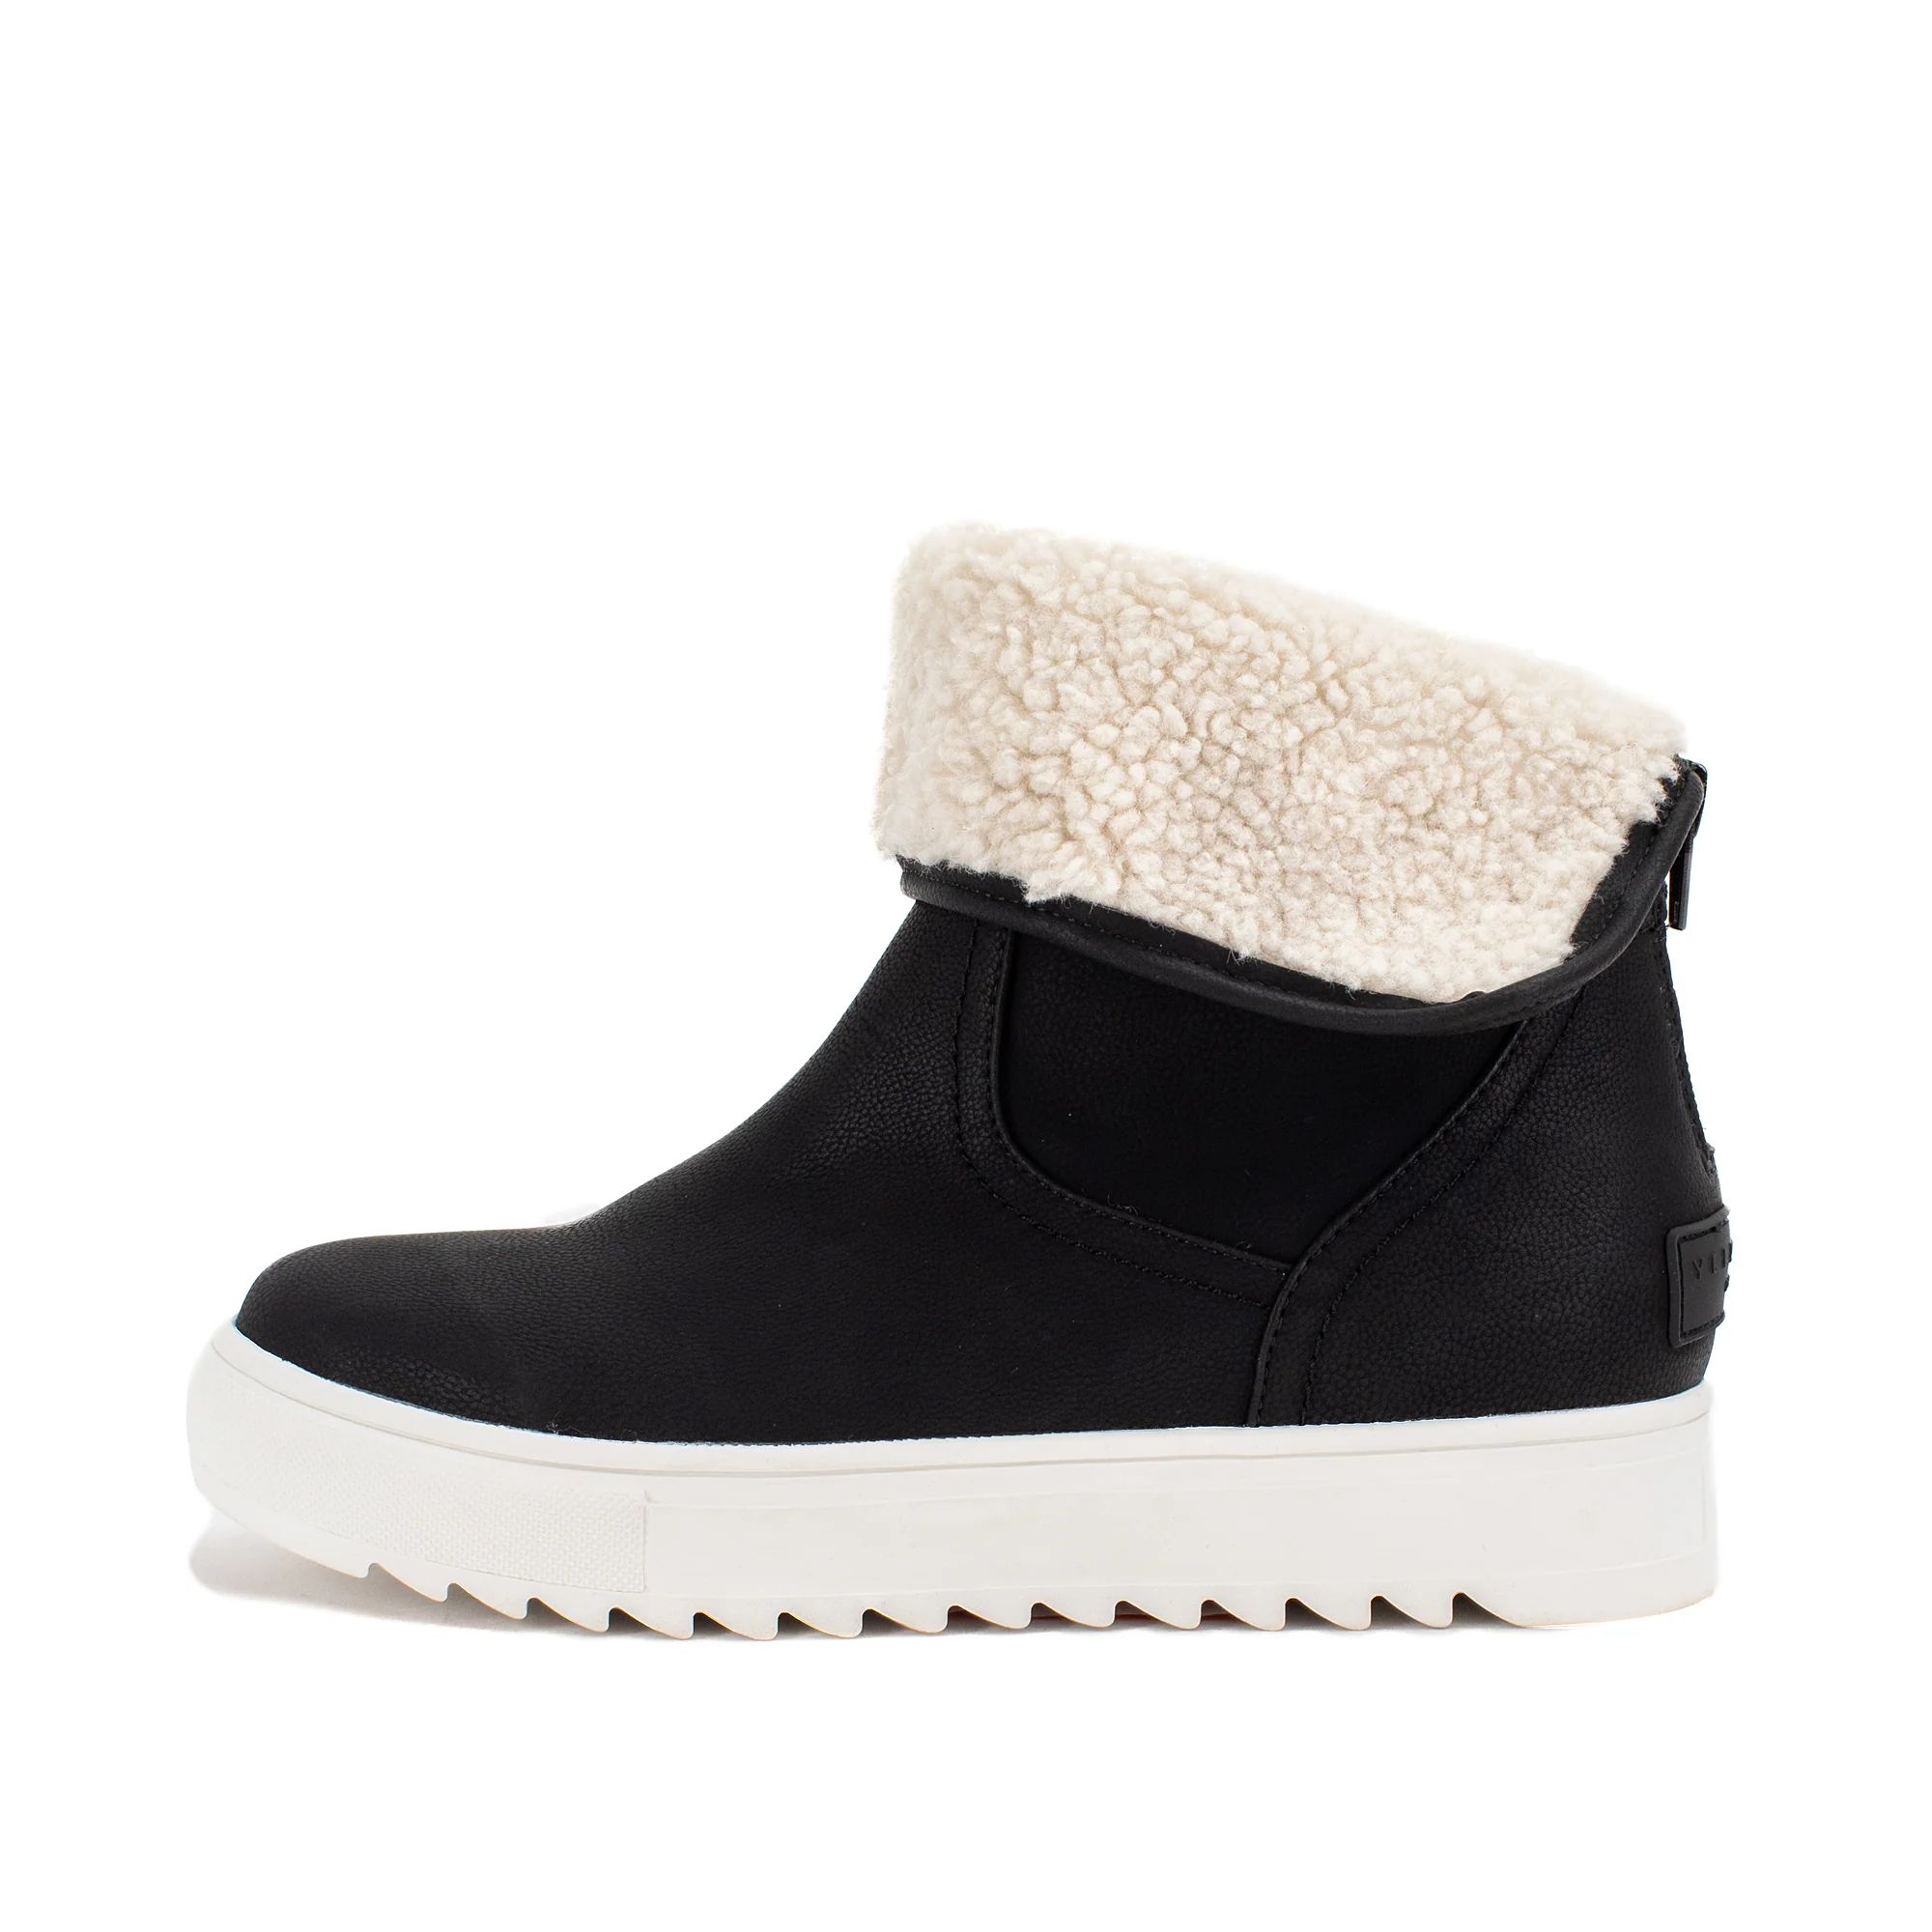 Melisa Wedge Sneaker Boot | Yellow Box Official Site | Yellow Box